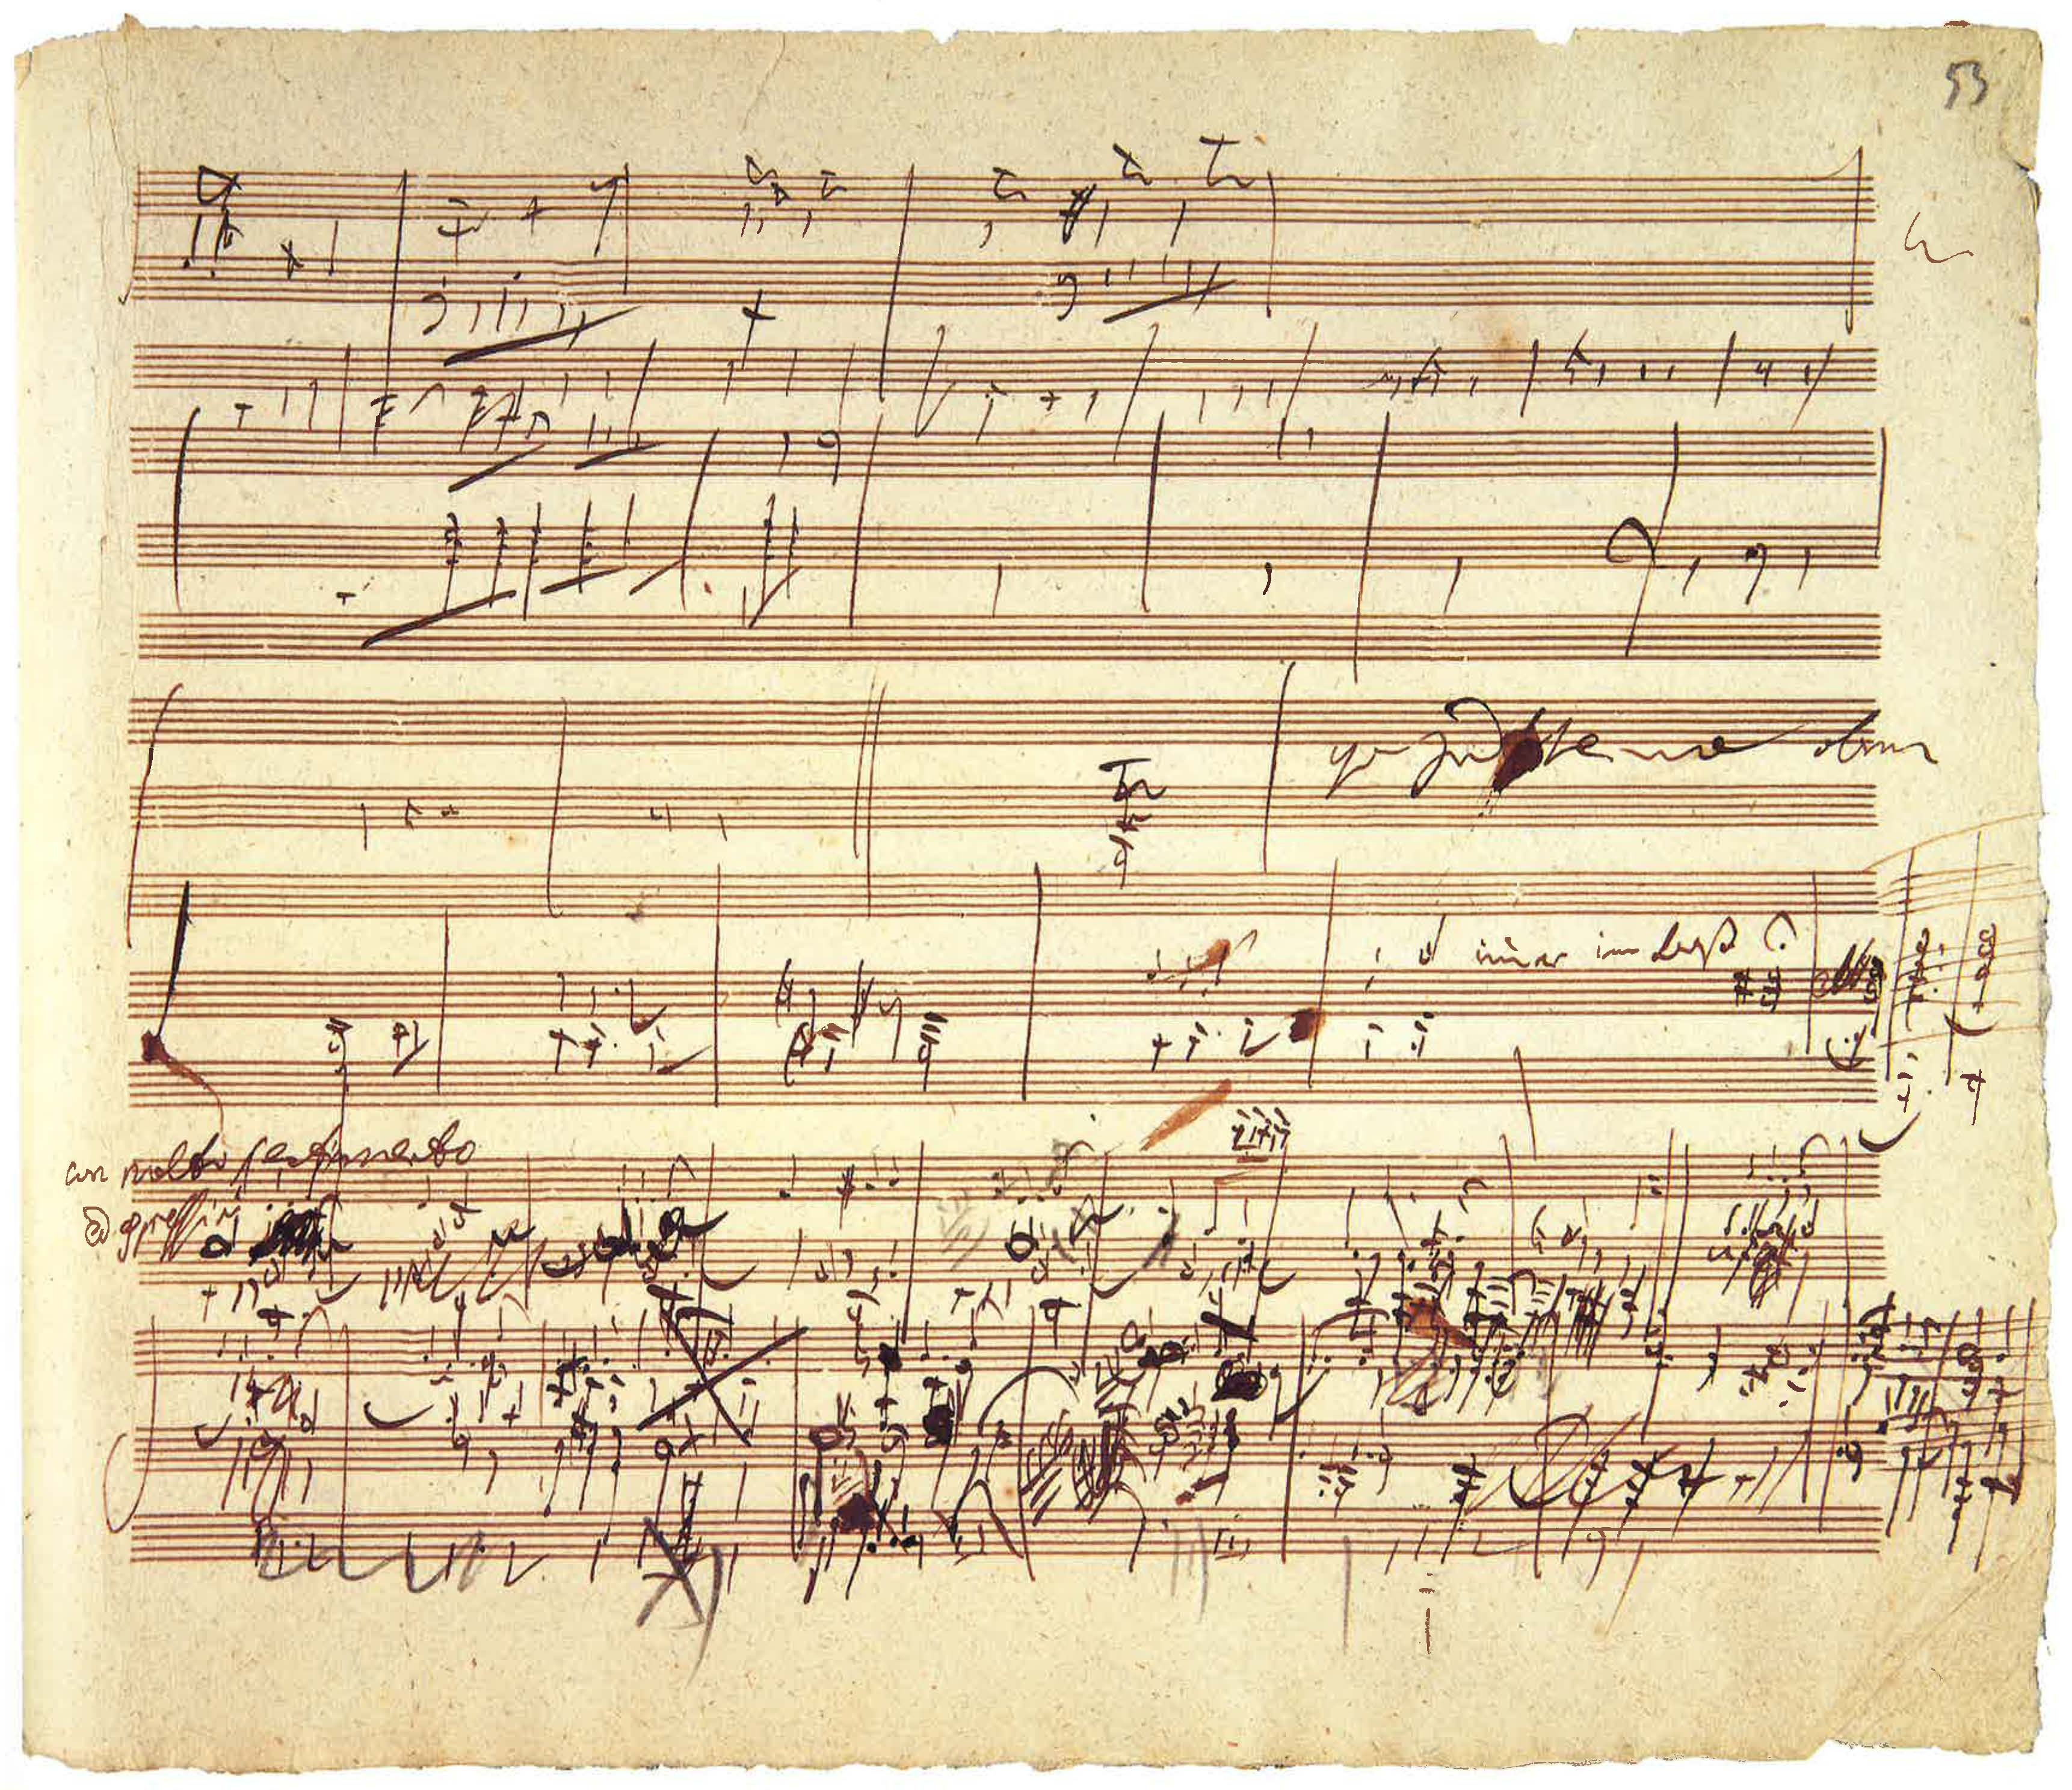 A yellowed page of music score with scrawled notes at the bottom.